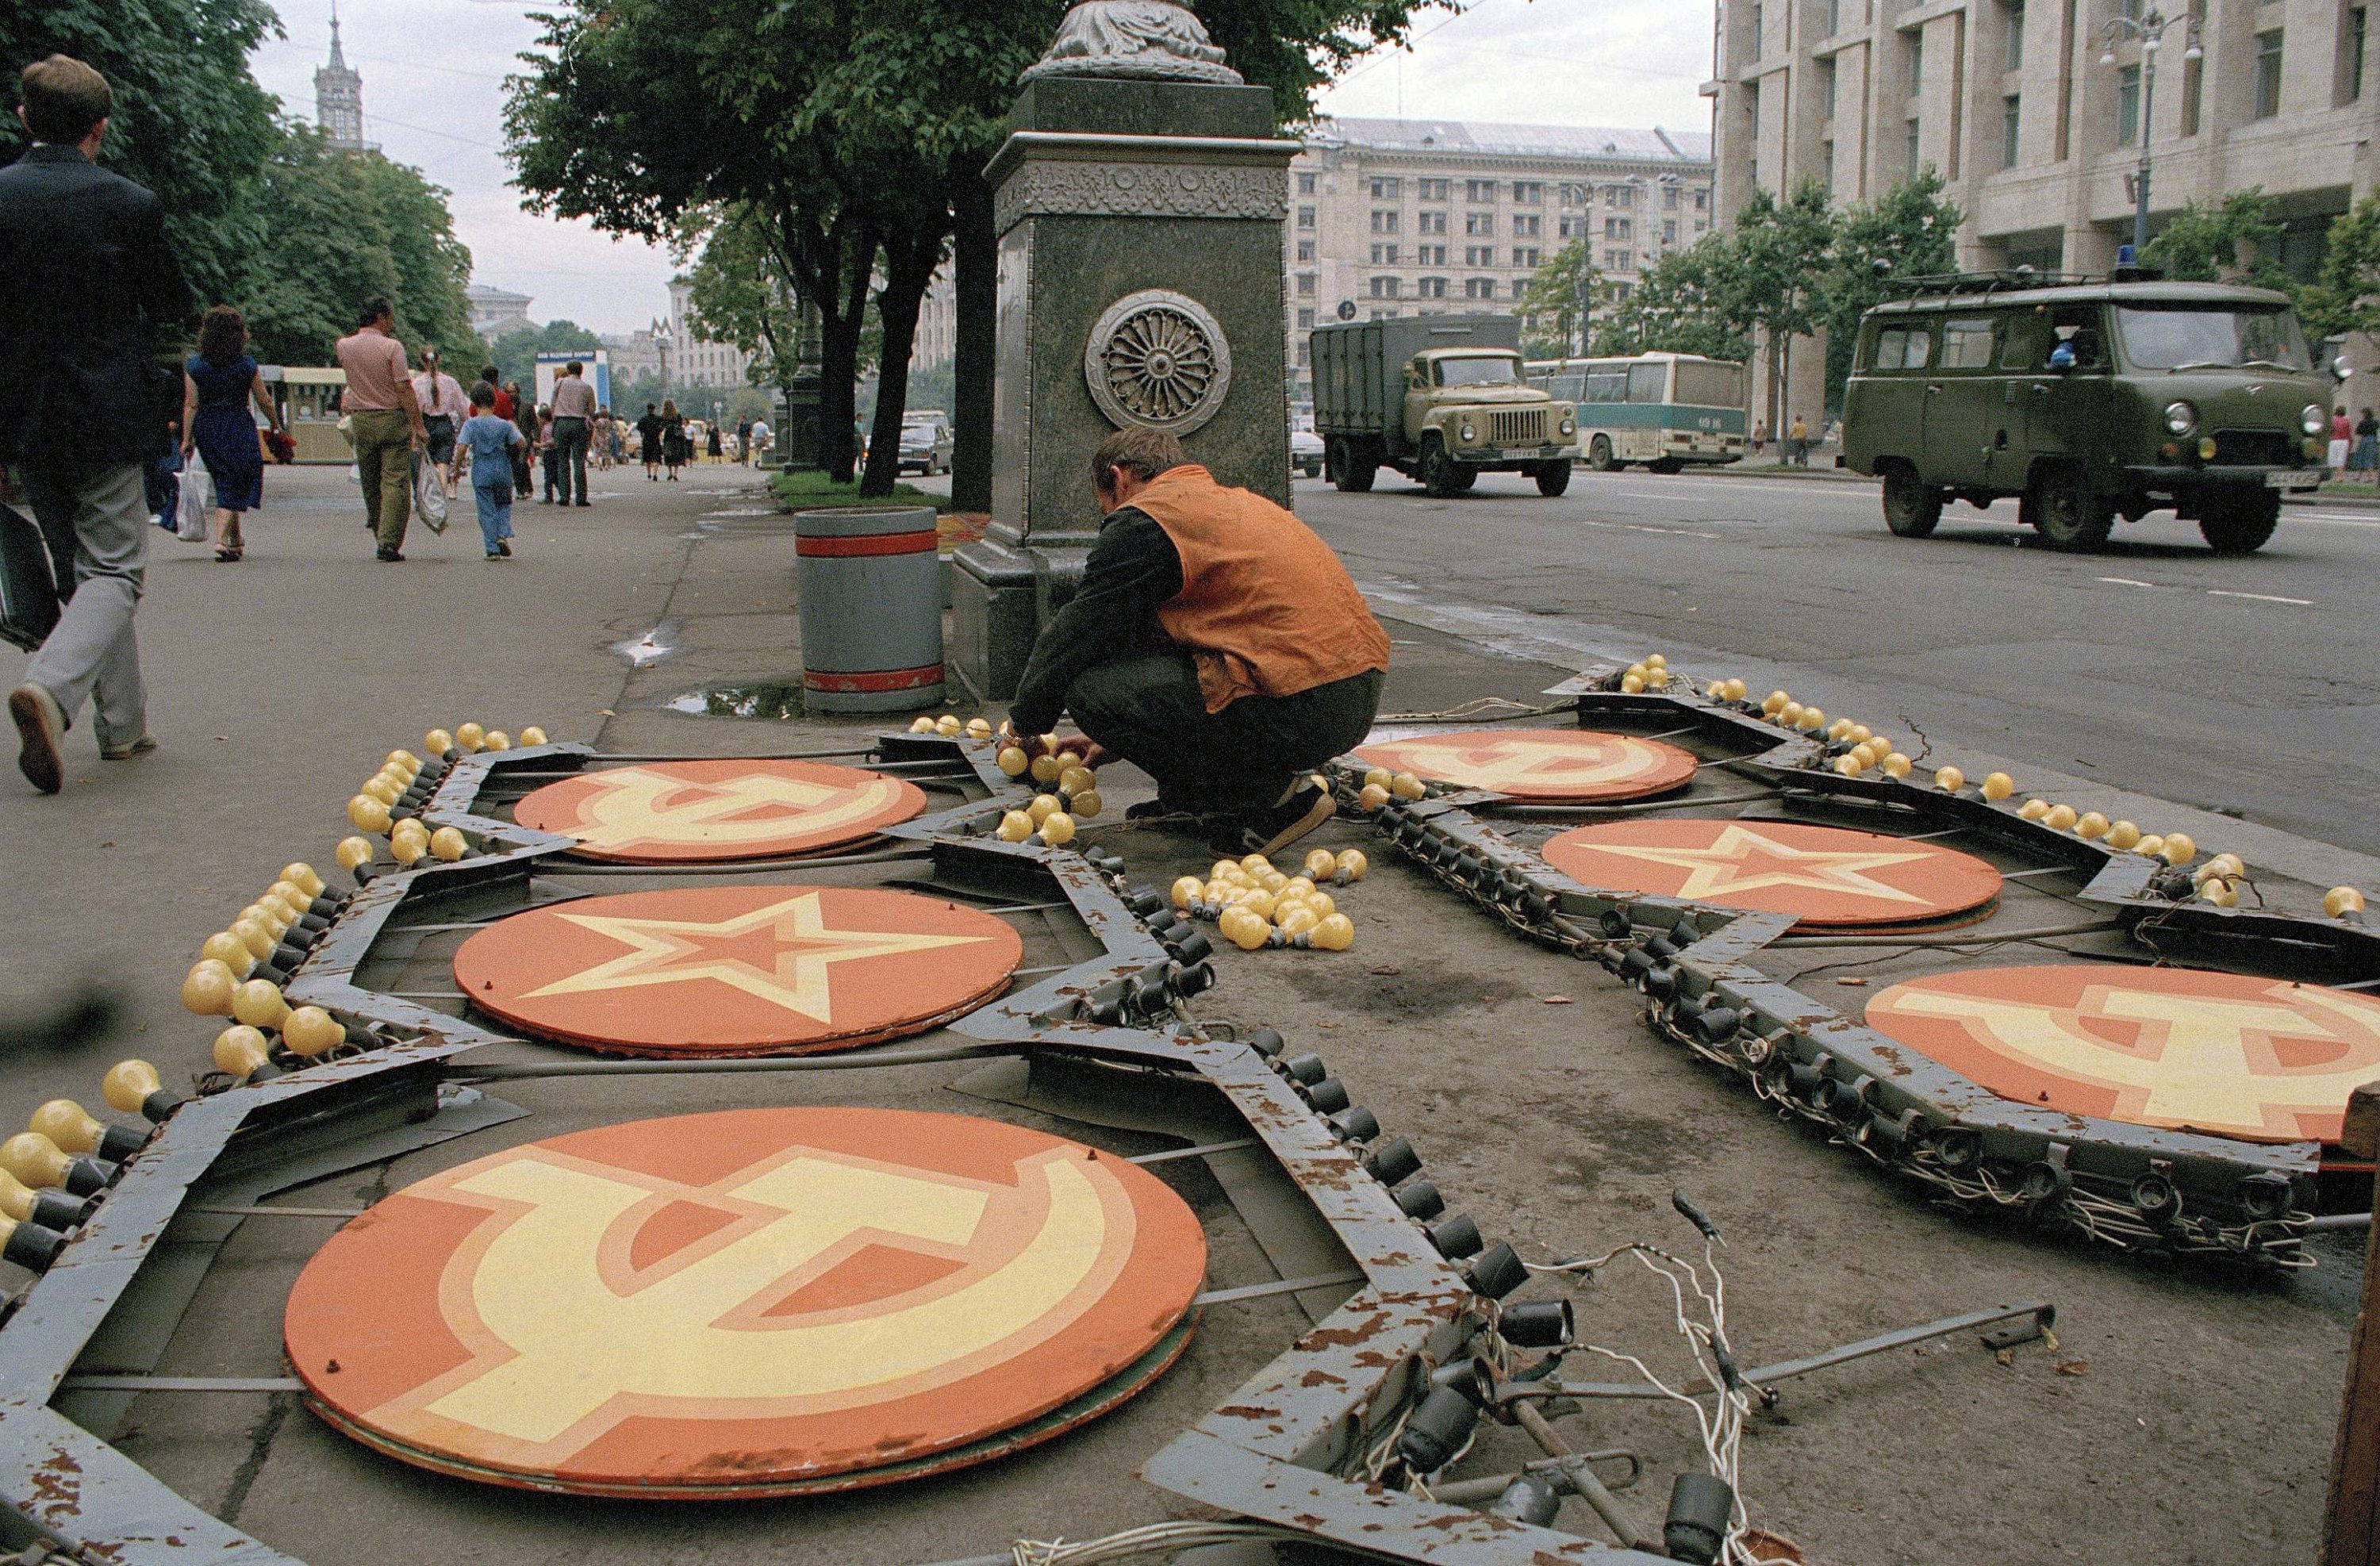 Ukrainian city council workers dismantle and remove the illuminated hammer and sickle – symbols of the Soviet Union that decorated the main street in downtown Kyiv, Ukraine, July 31, 1991. (AP Photo)